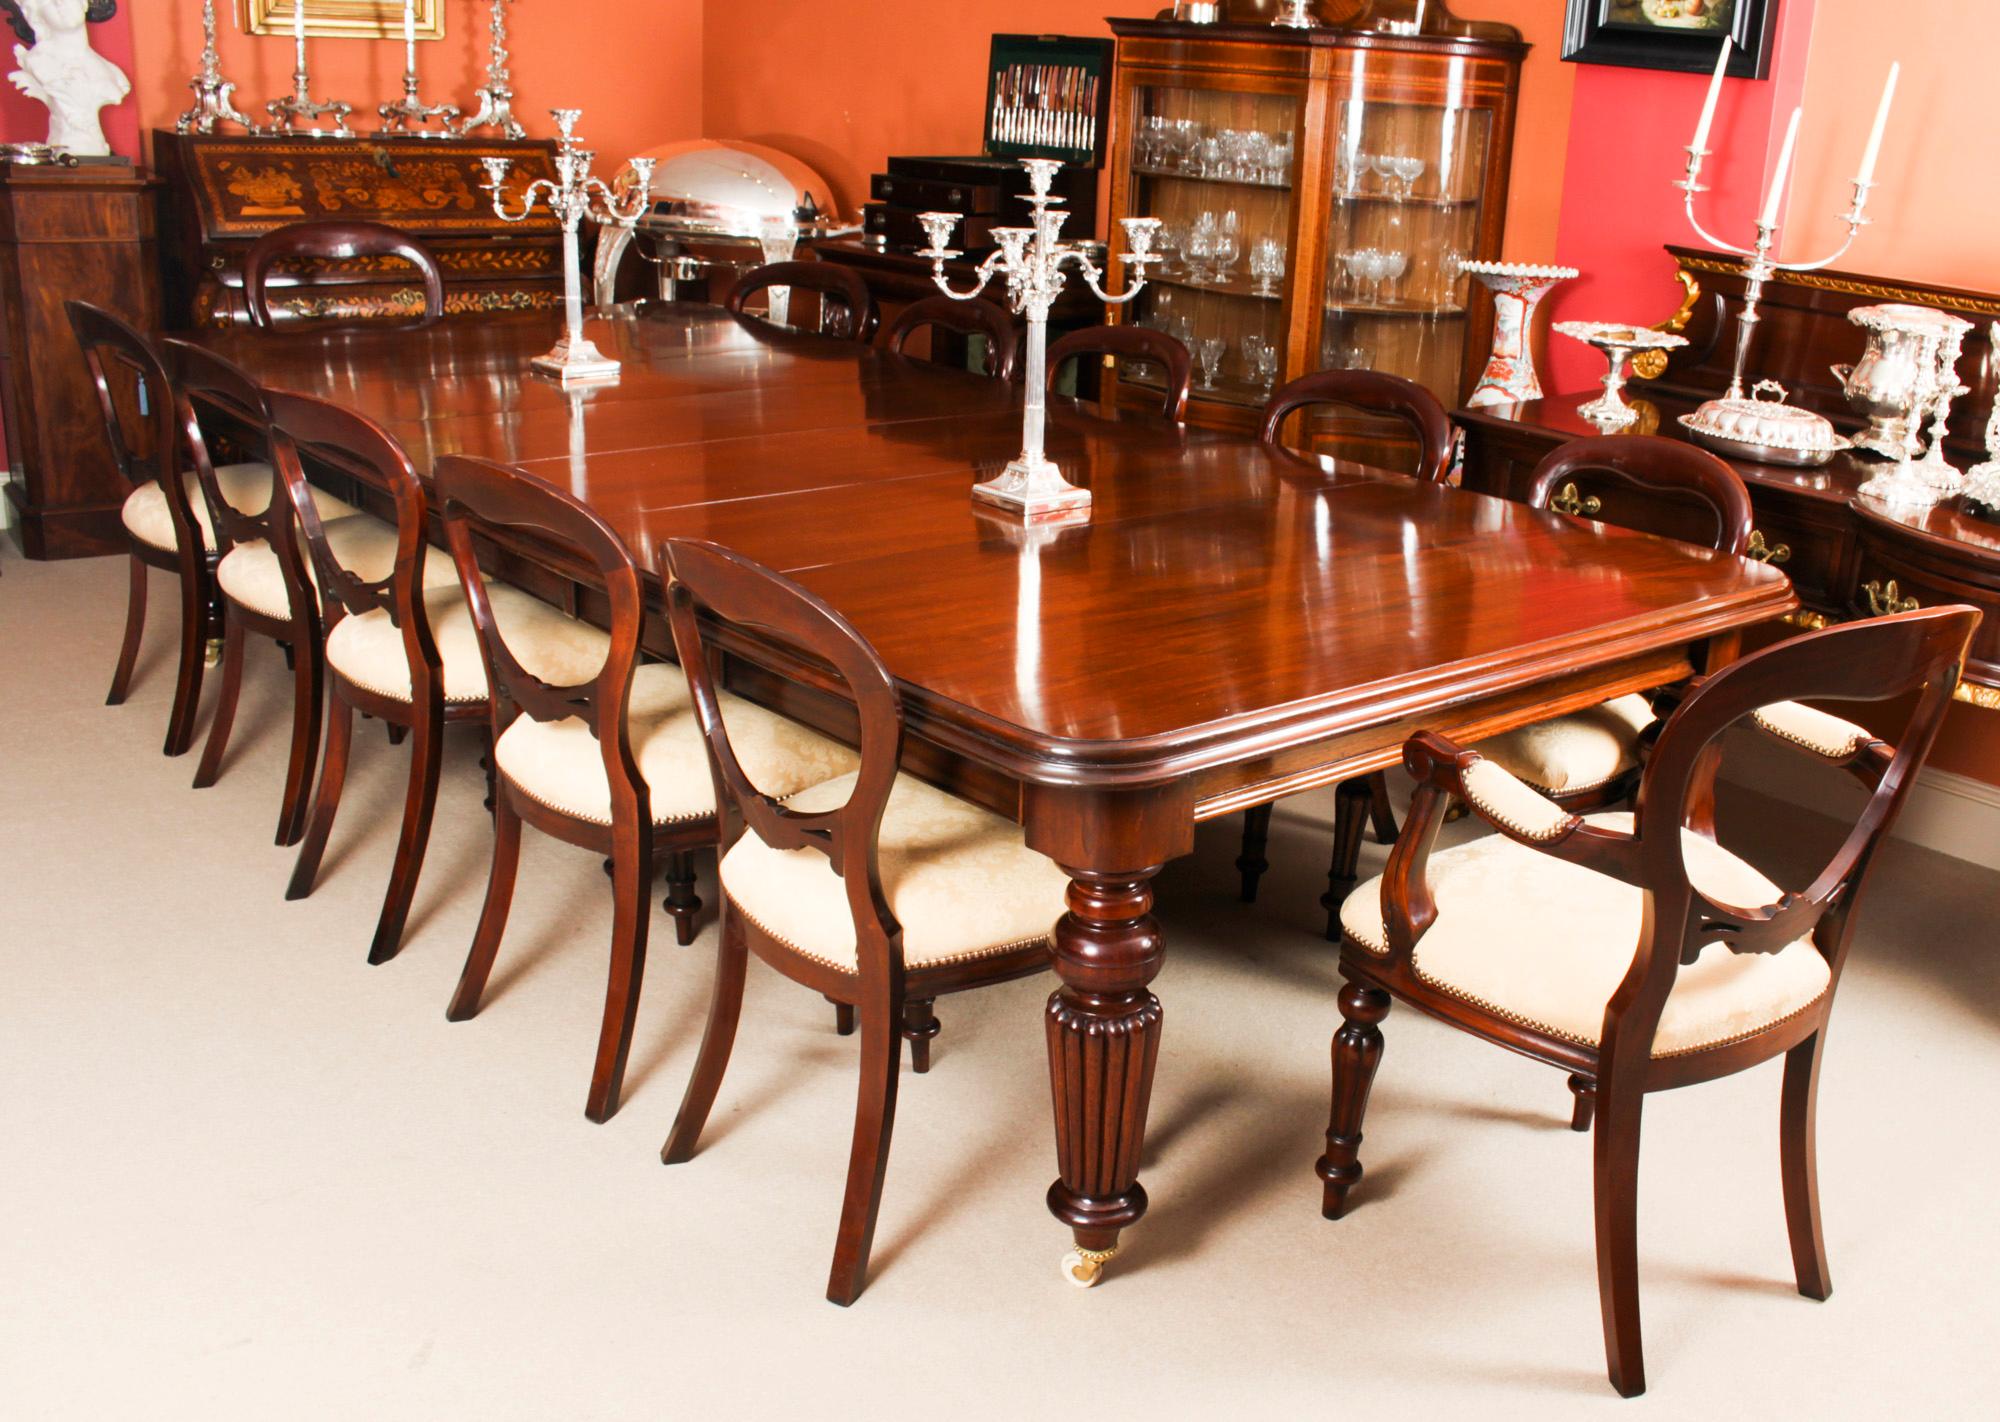 This is a rare opportunity to own an antique early Victorian, flame mahogany dining or conference table, circa 1850 in date and a set of 12 Victorian revival balloon back dining chairs.

The superb dining table has four original leaves which can be